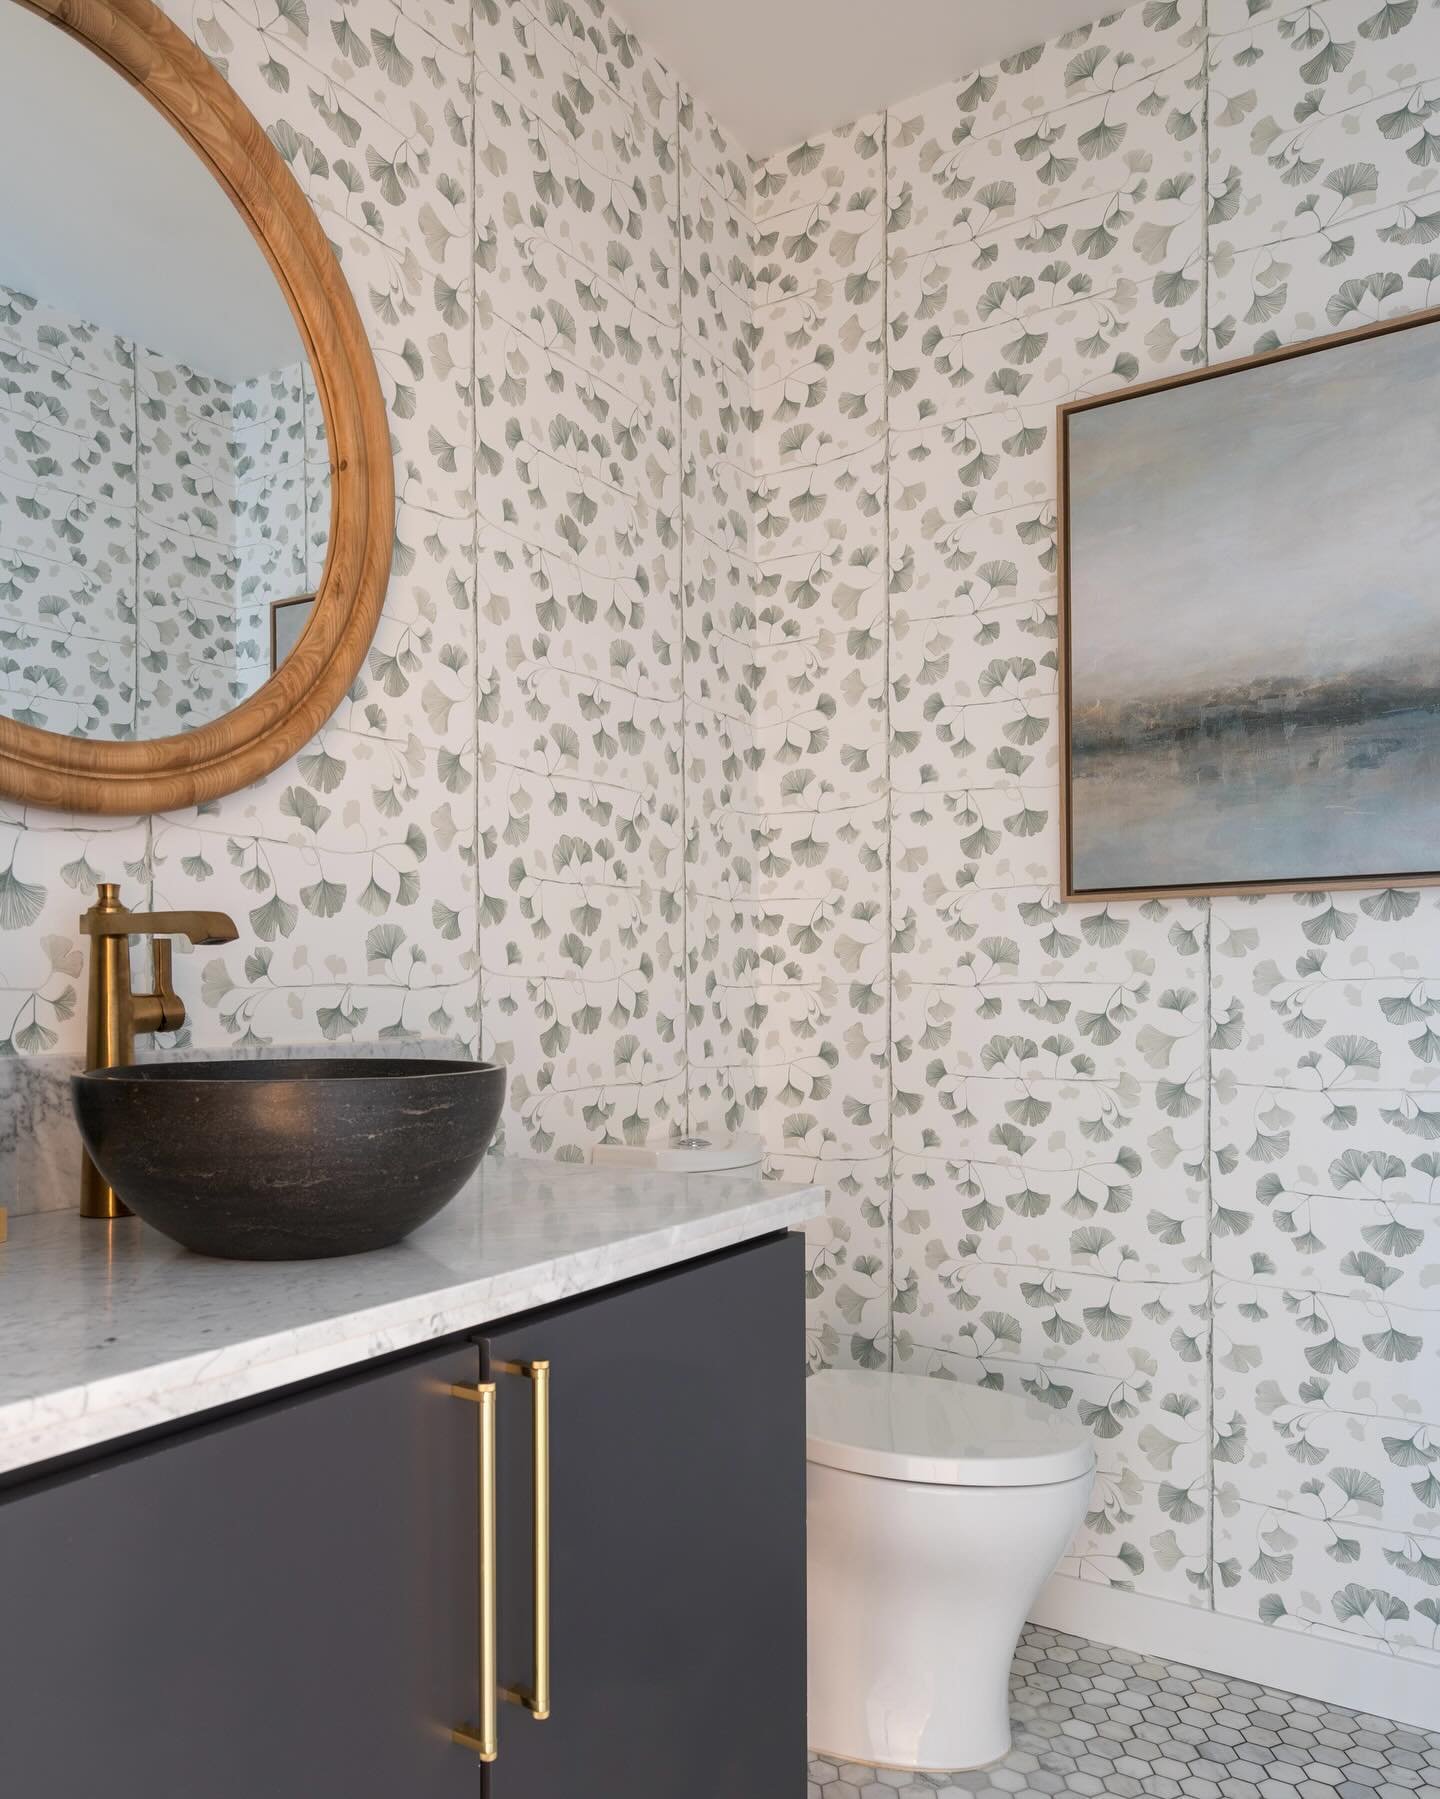 A warm and tranquil powder room&rsquo;s transformation